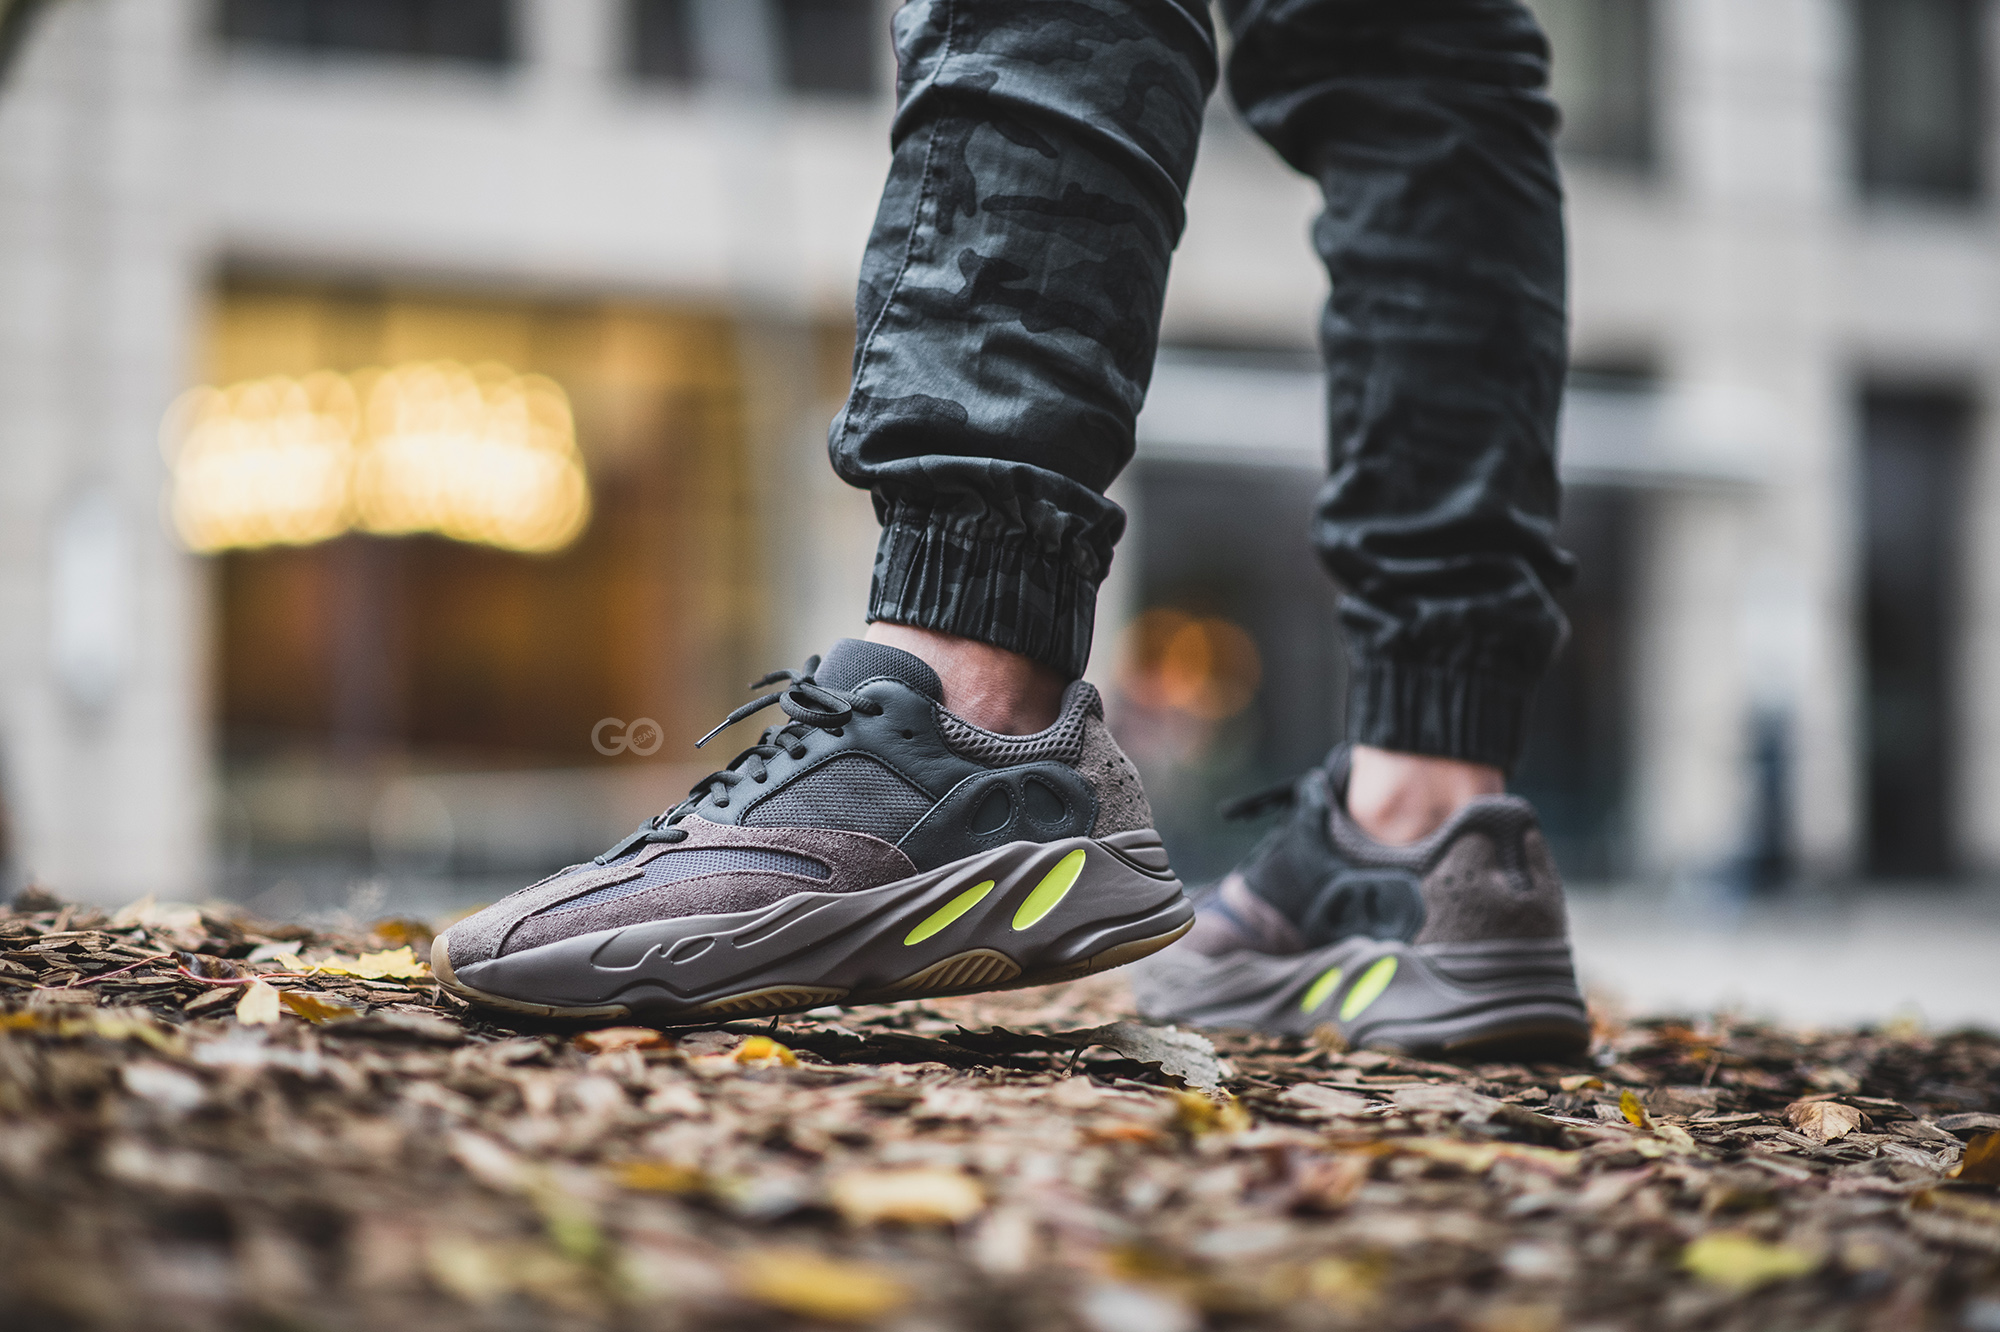 yeezy boost 700 mauve review